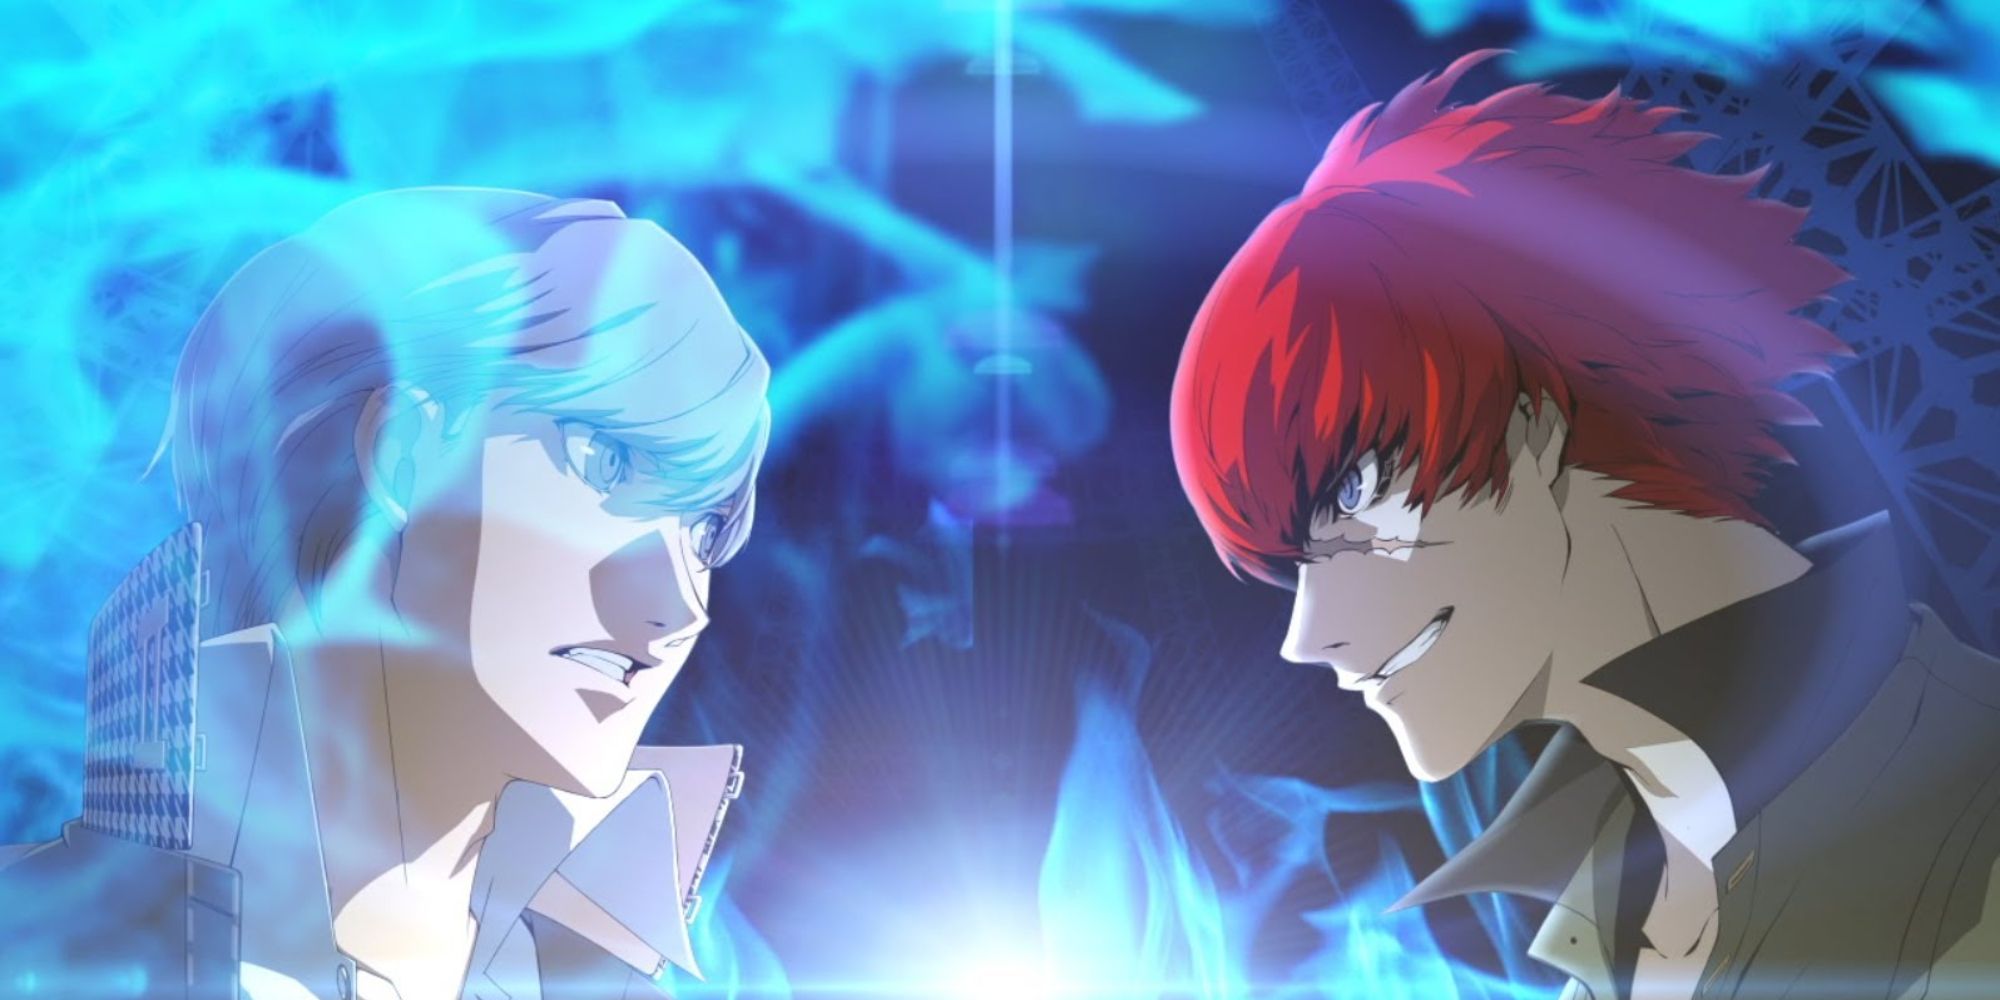 Yu and Sho clash in Persona 4 Arena Ultimax